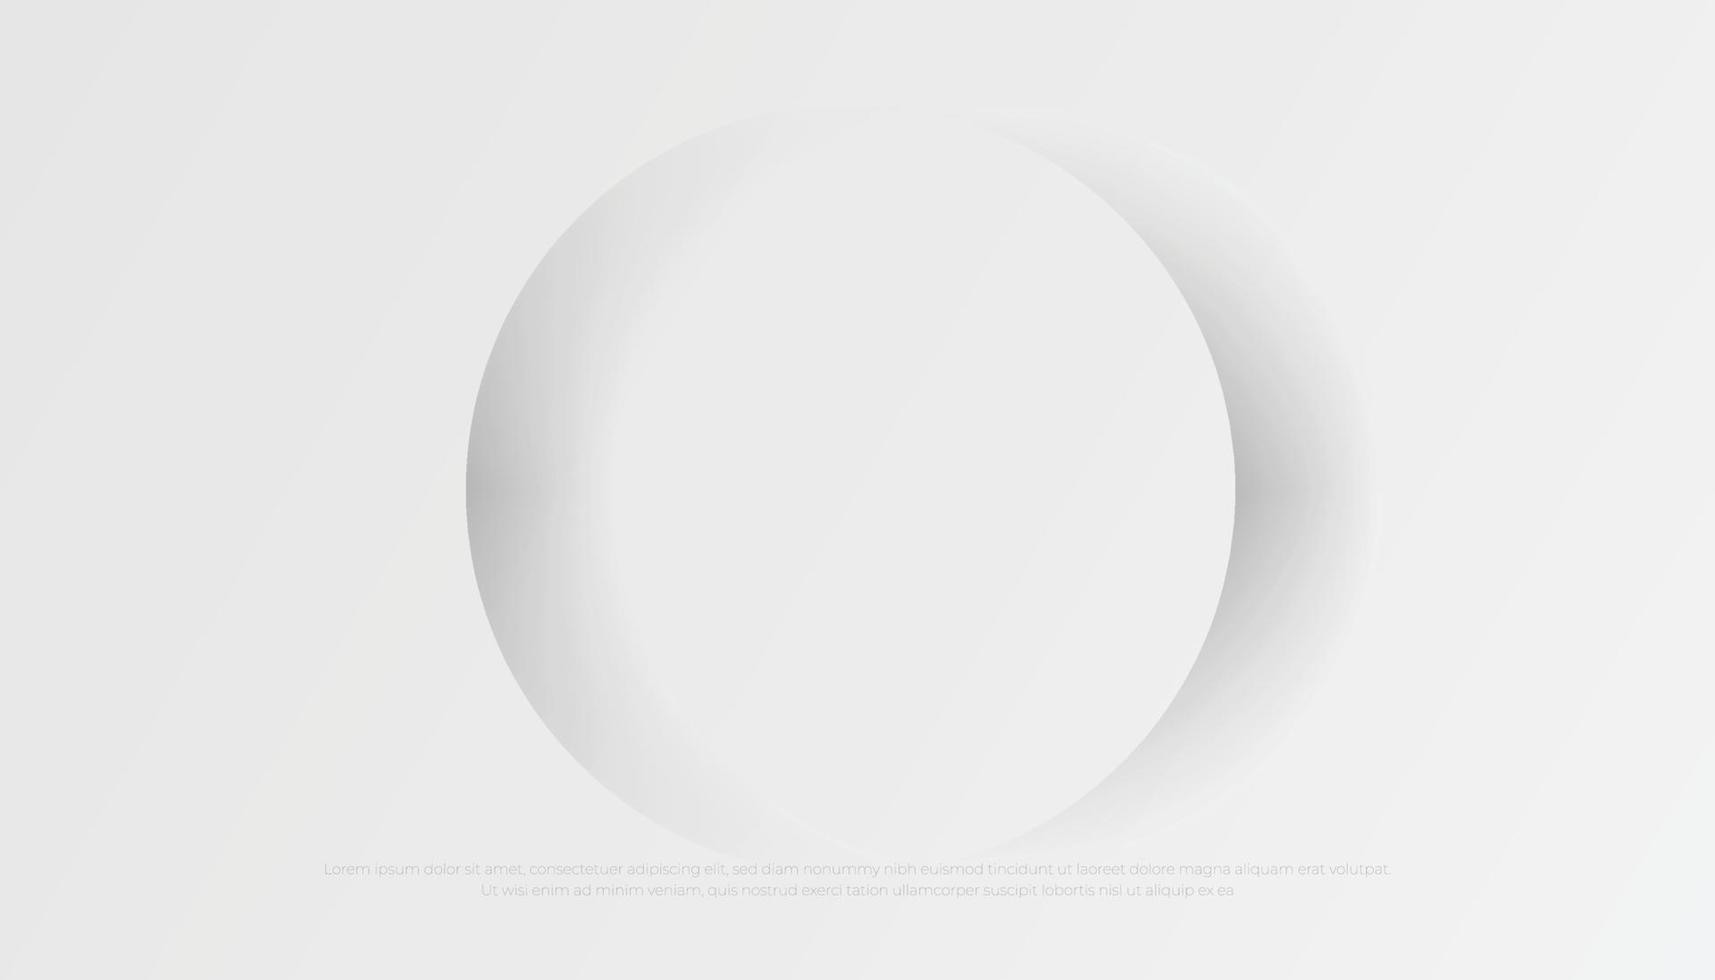 Abstract Transparent Circles with Drop Shadow on White Background, Paper Cut Style. Vector Illustration